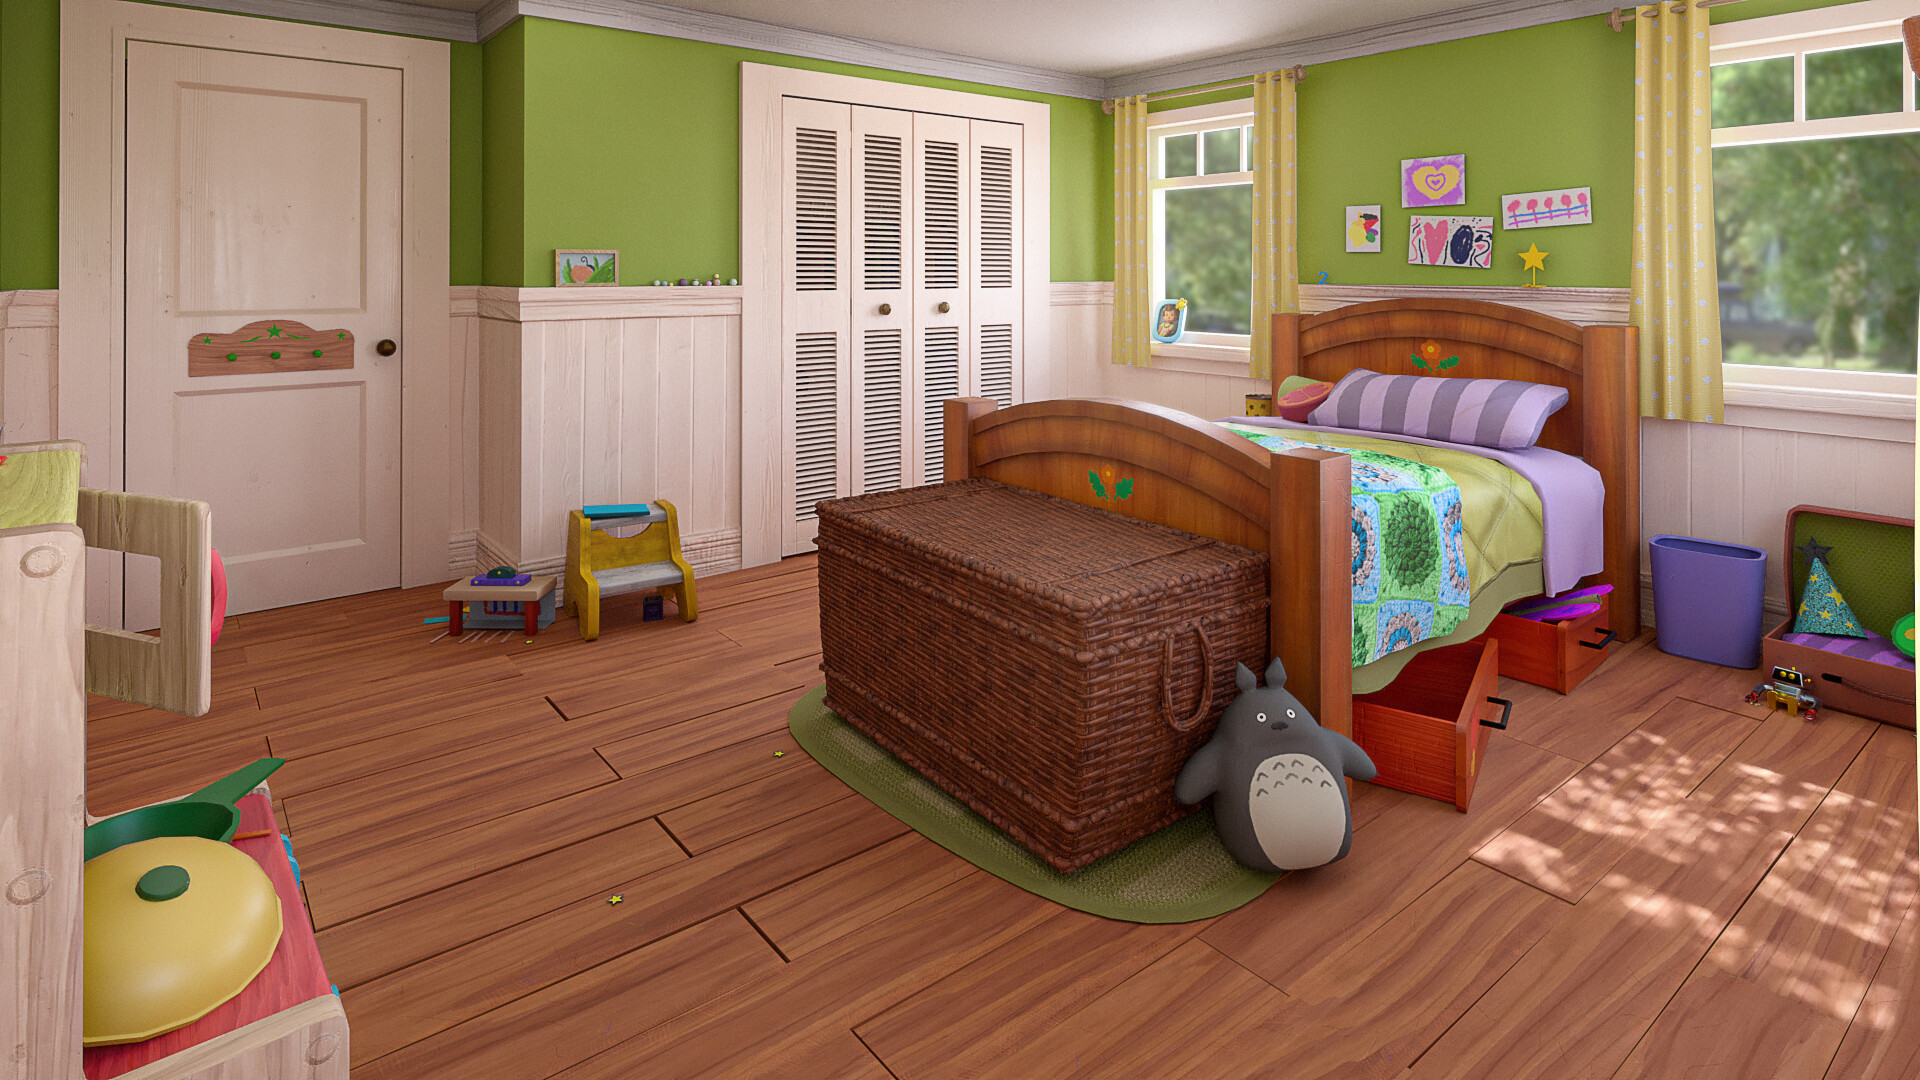 Bonnie's room from Toy Story 3. Love the green and purple.